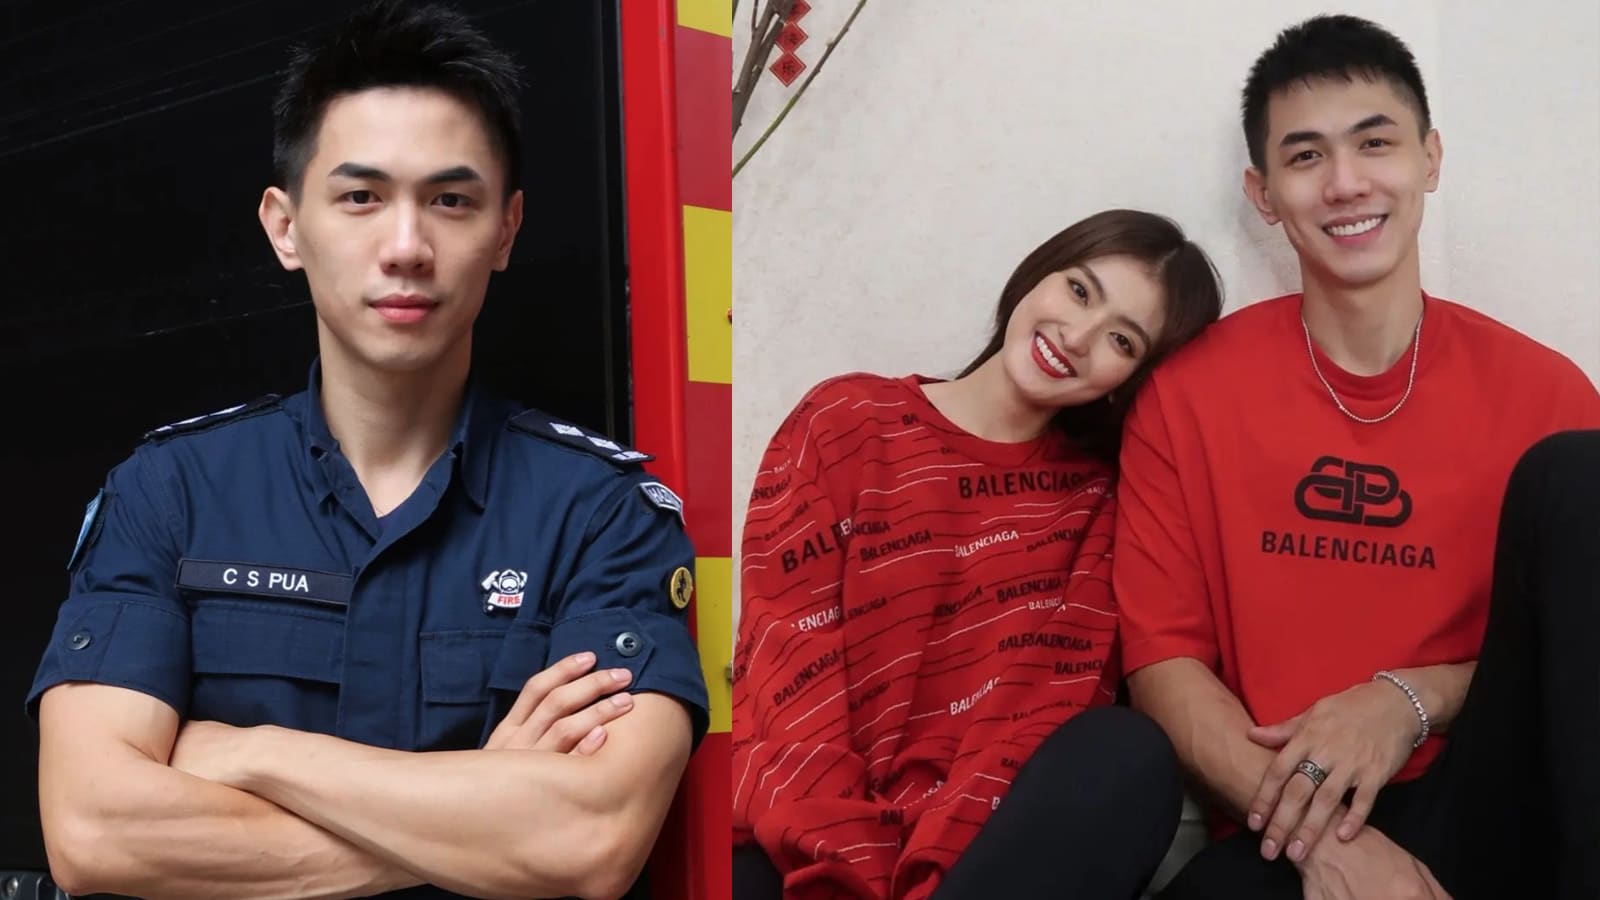 Nick Teo On Why He Plans To Marry Hong Ling In 2 Years & How Sales For Their Bird's Nest Biz Grew 25% Since The Pandemic